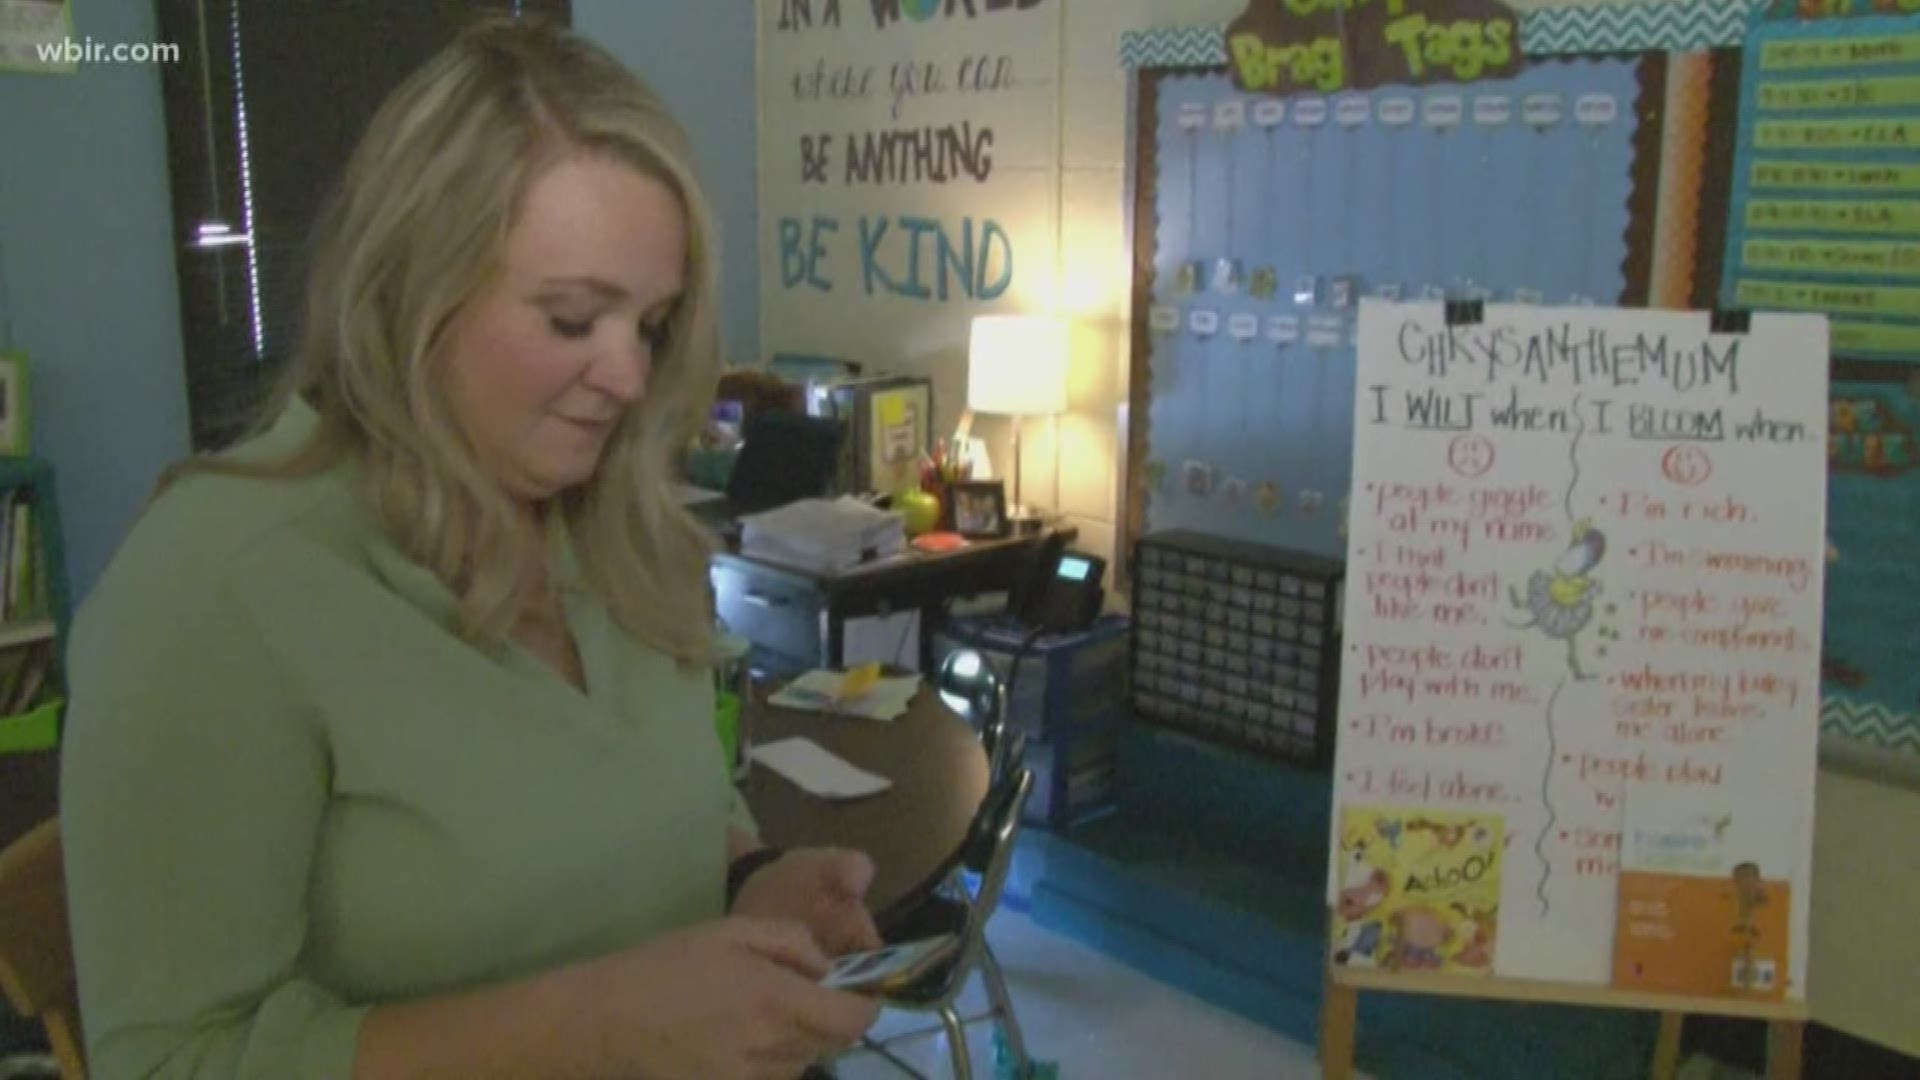 At least two Knox County teachers were targeted last week. The scammers were asking for $1,800 in vouchers.